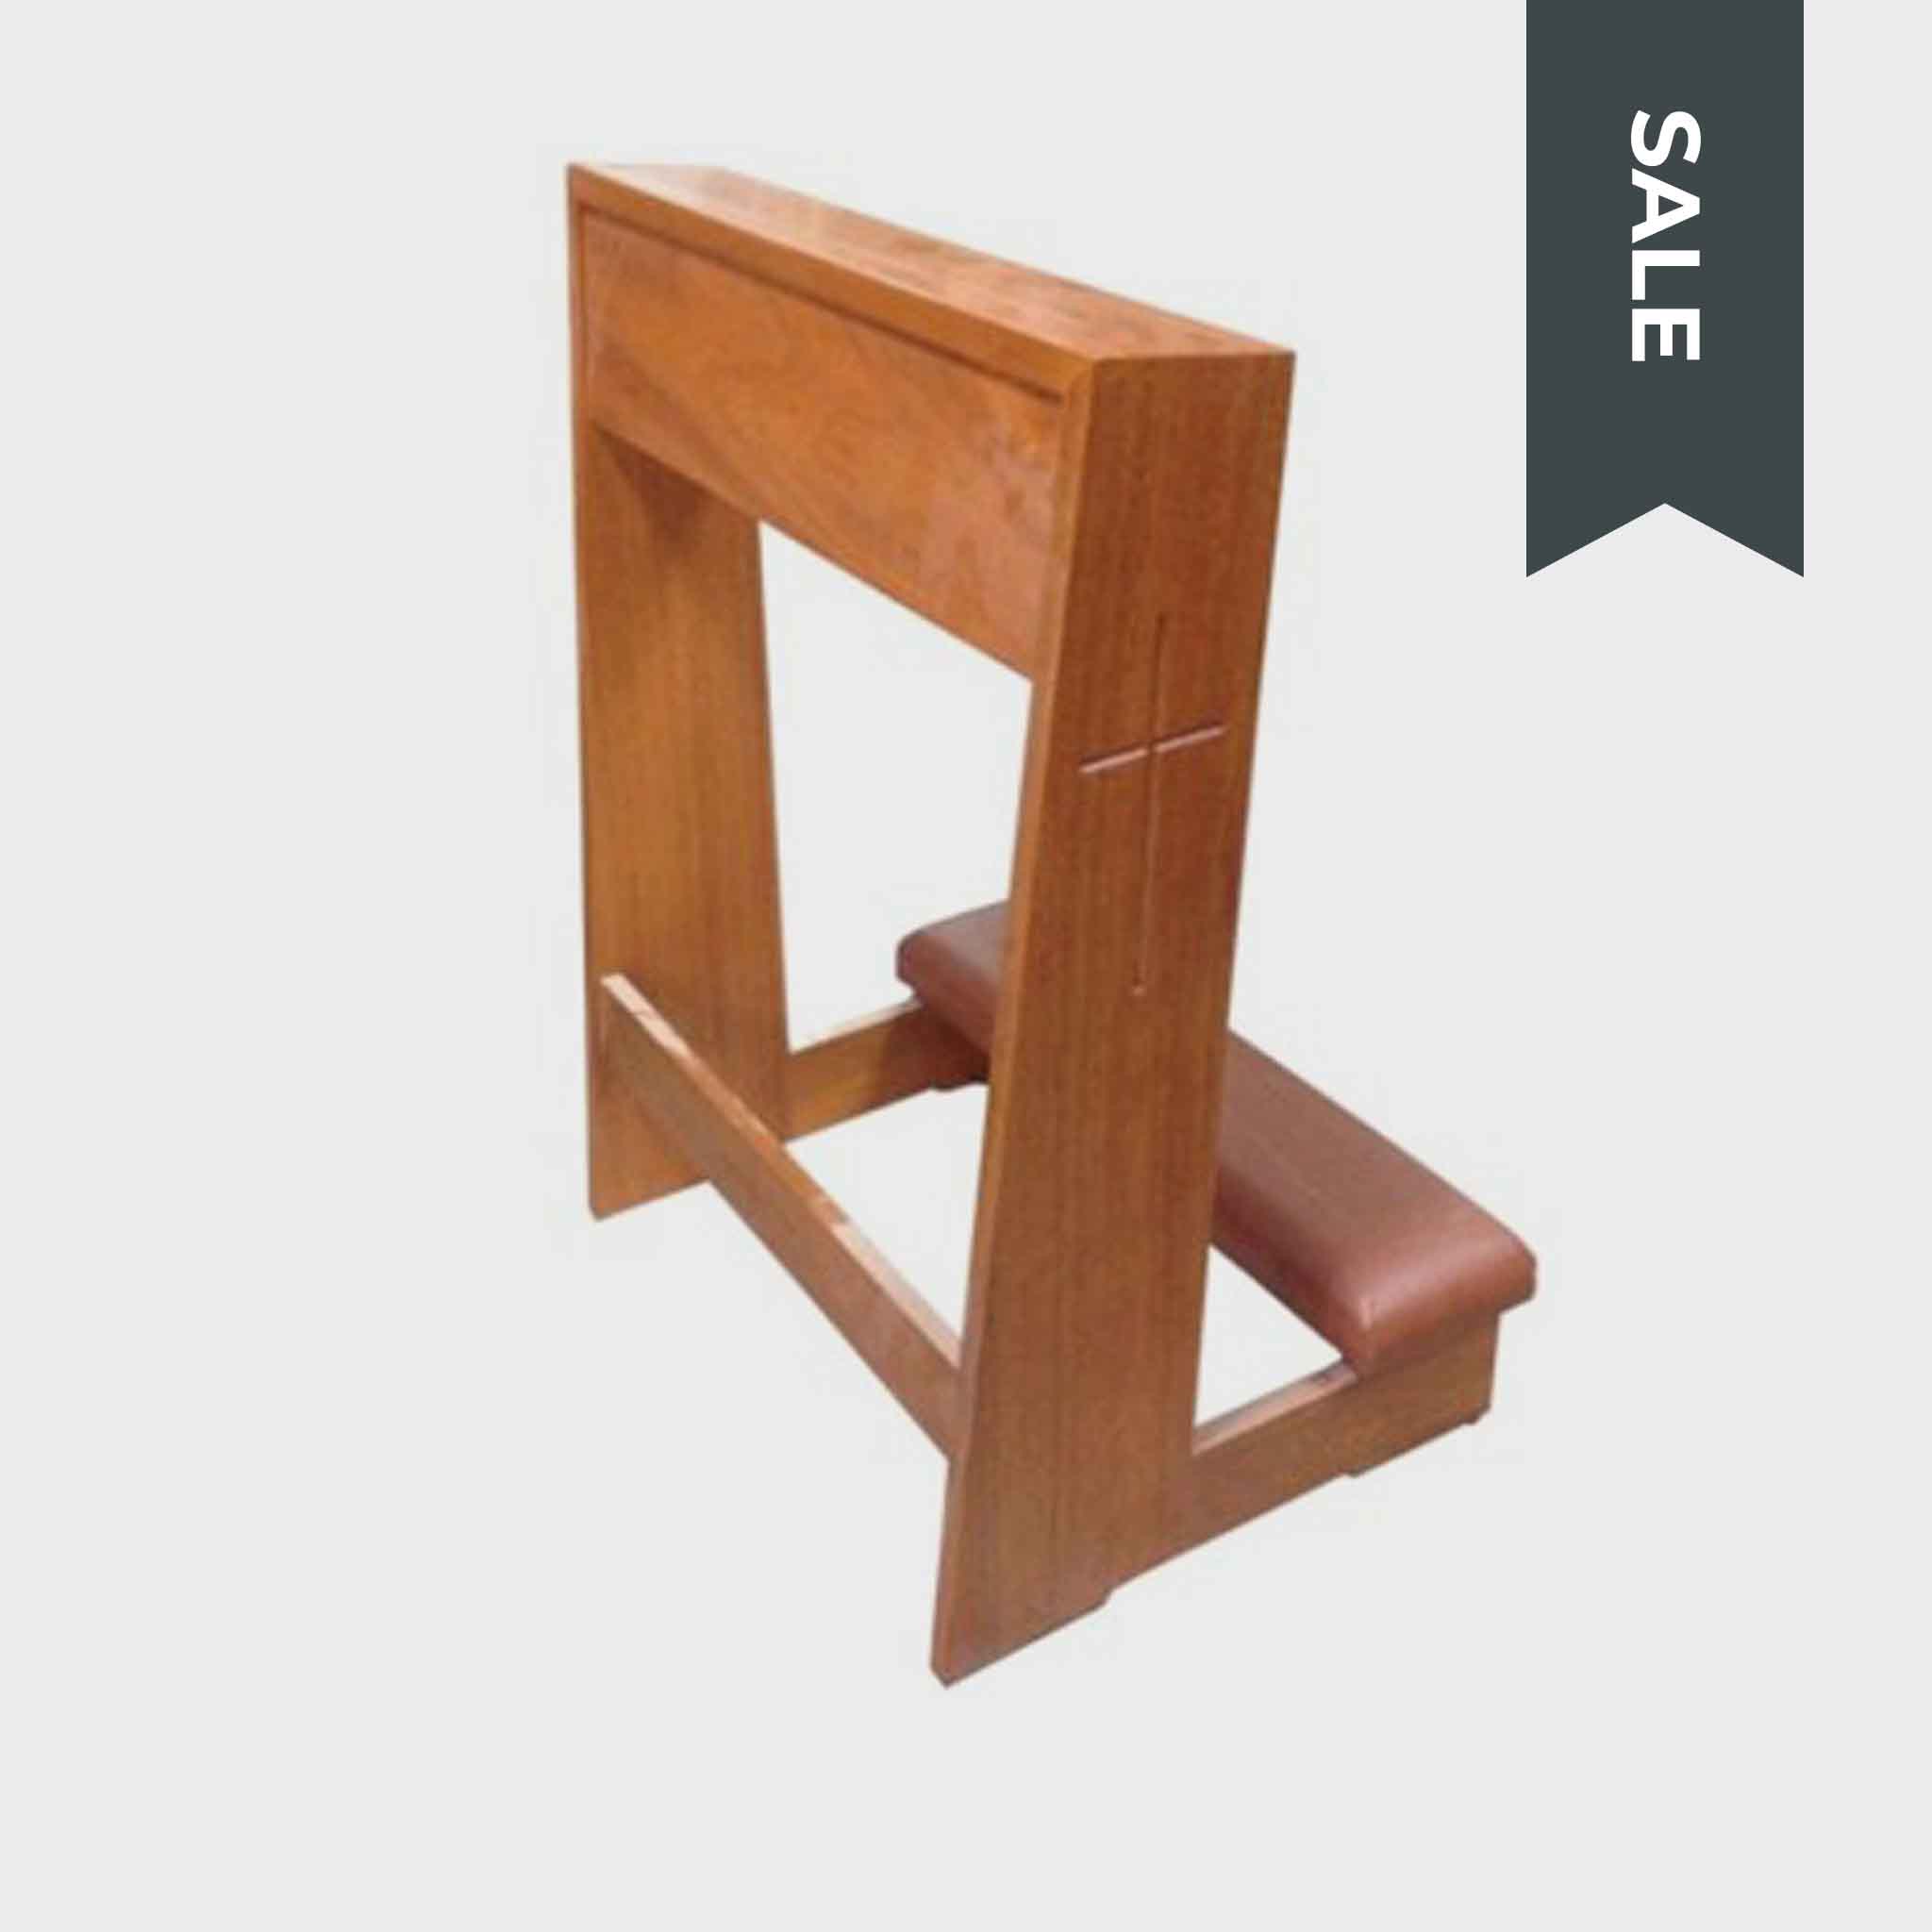 Single Kneeler - Focolare Carpentry - Furniture Manufacturer Philippines - Custom-made Chairs, Tables, Beds, Sofa, Cabinets, Handicraft, Woodworks.